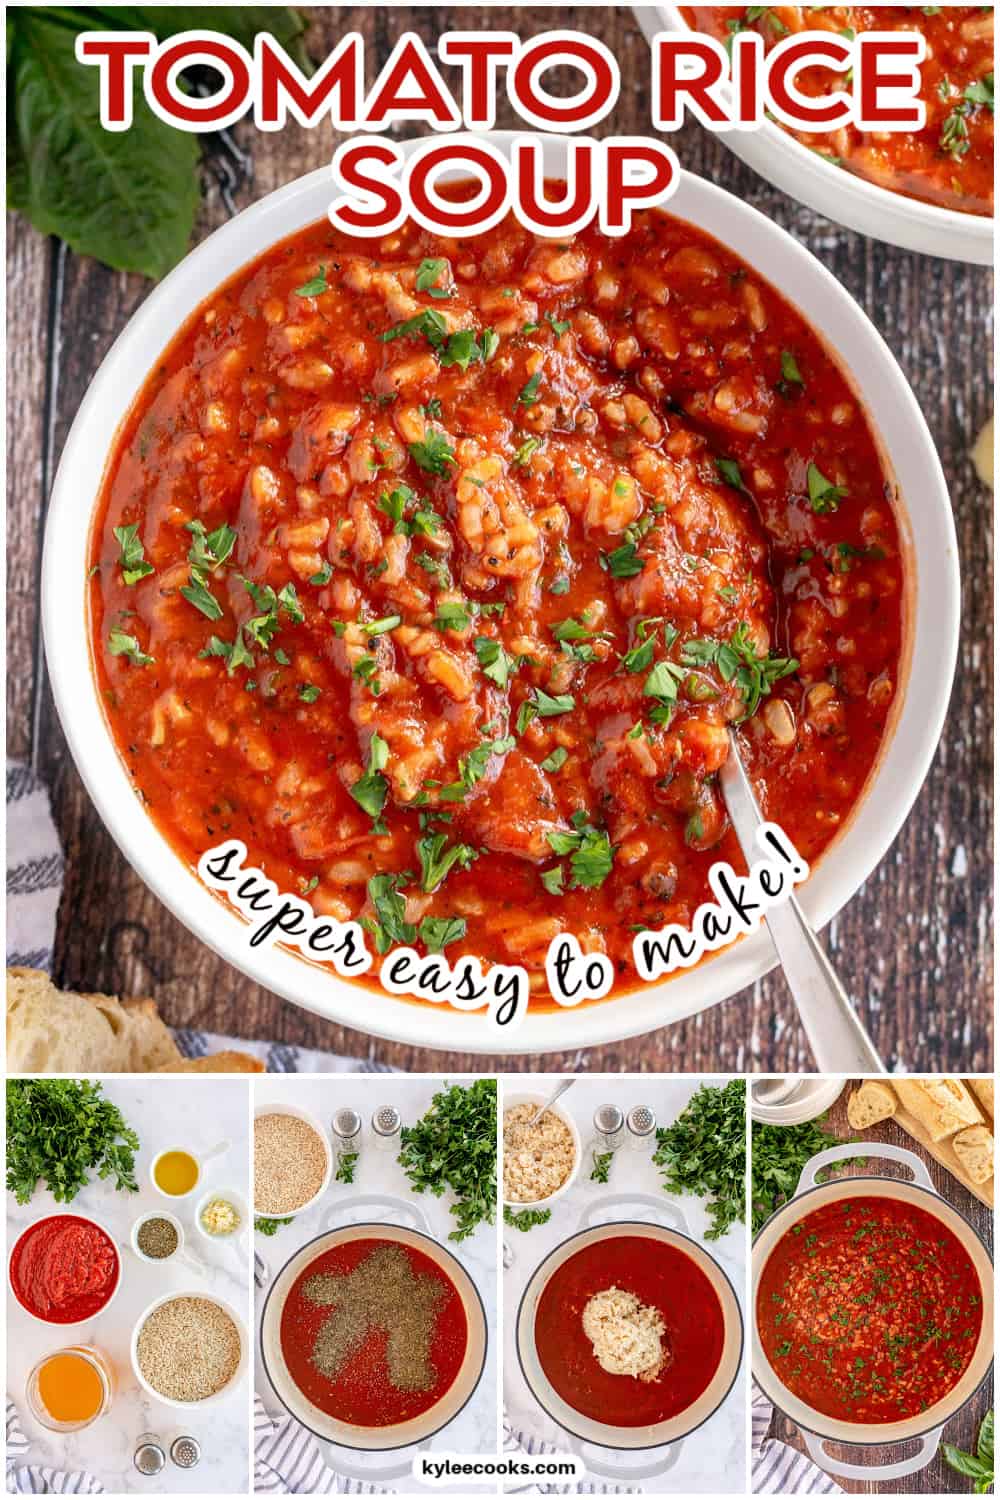 tomato rice soup with recipe title overlaid in text.tomato rice soup with recipe title overlaid in text.